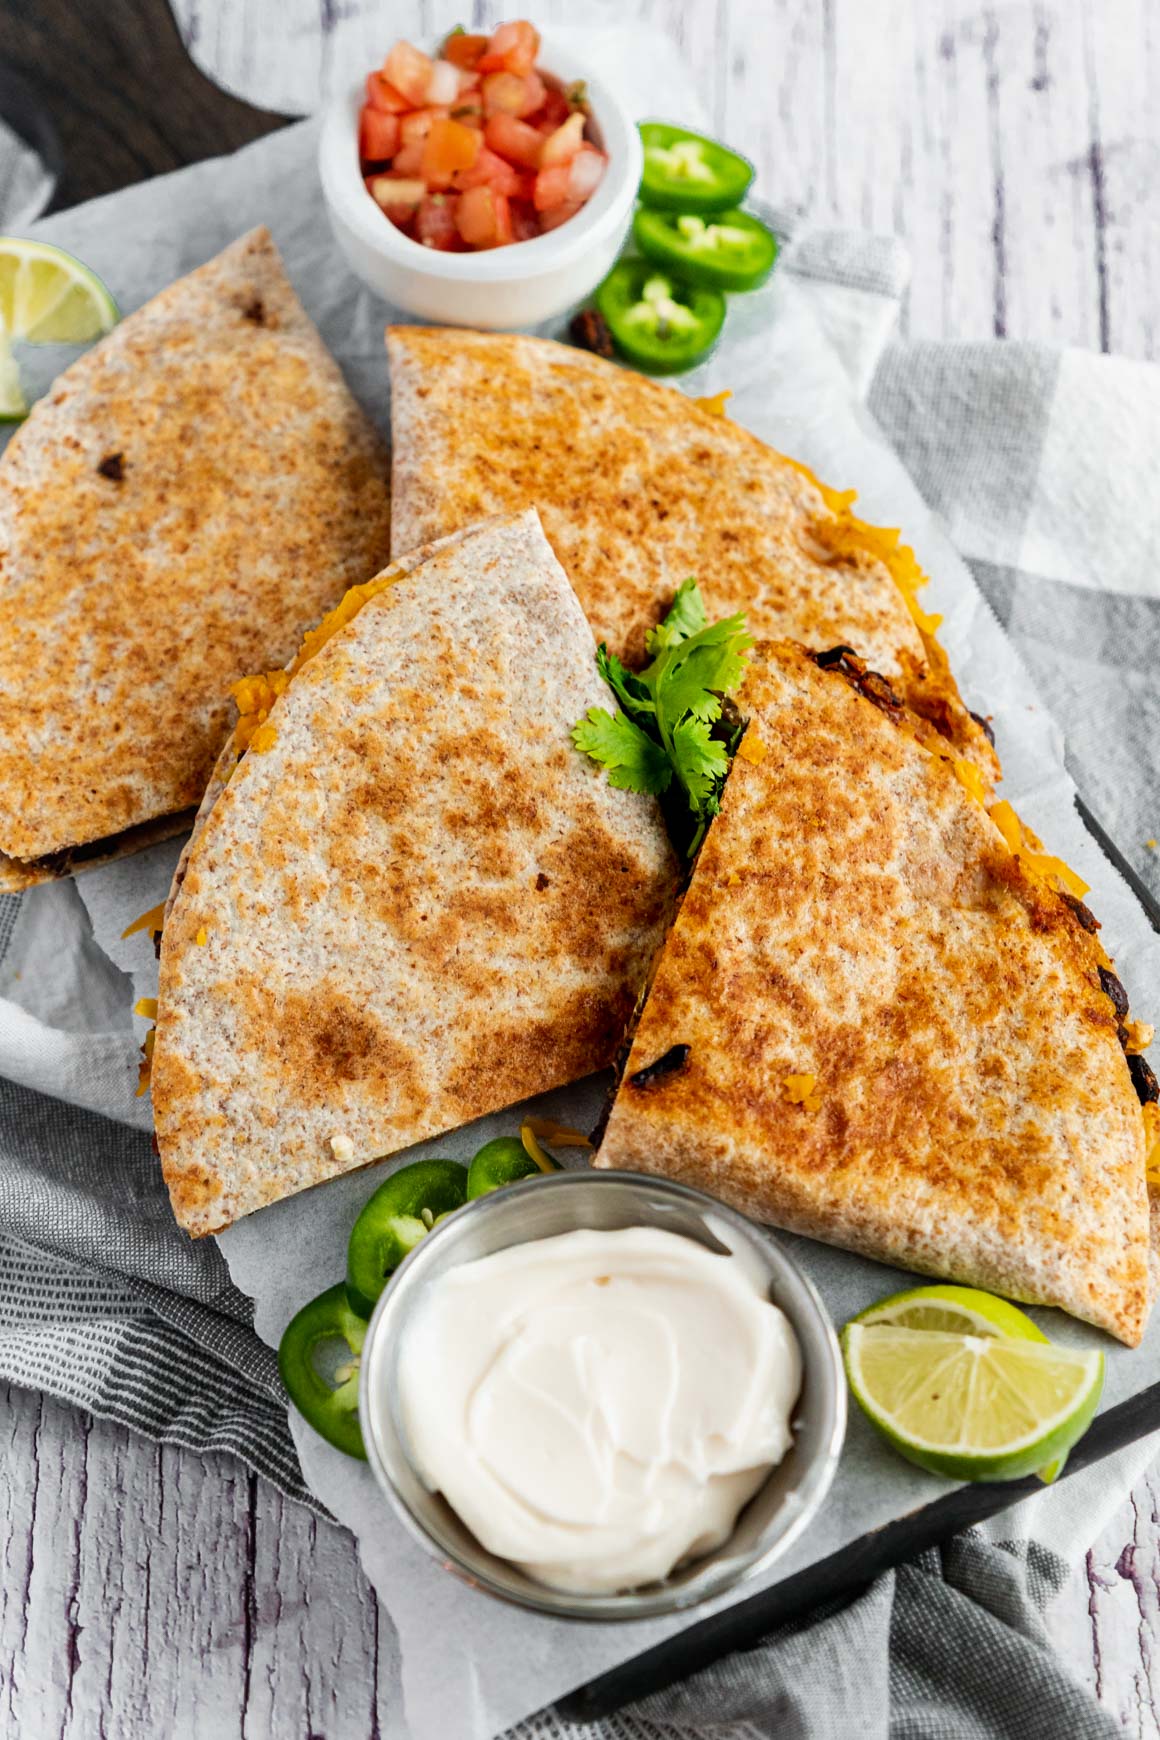 Side-view image of a golden brown black bean quesadilla cute into quarters on a white board on a grey kitchen napkin. To the side there is a small bowl of diced tomato, sliced jalapeno and another bowl of vegan sour cream.